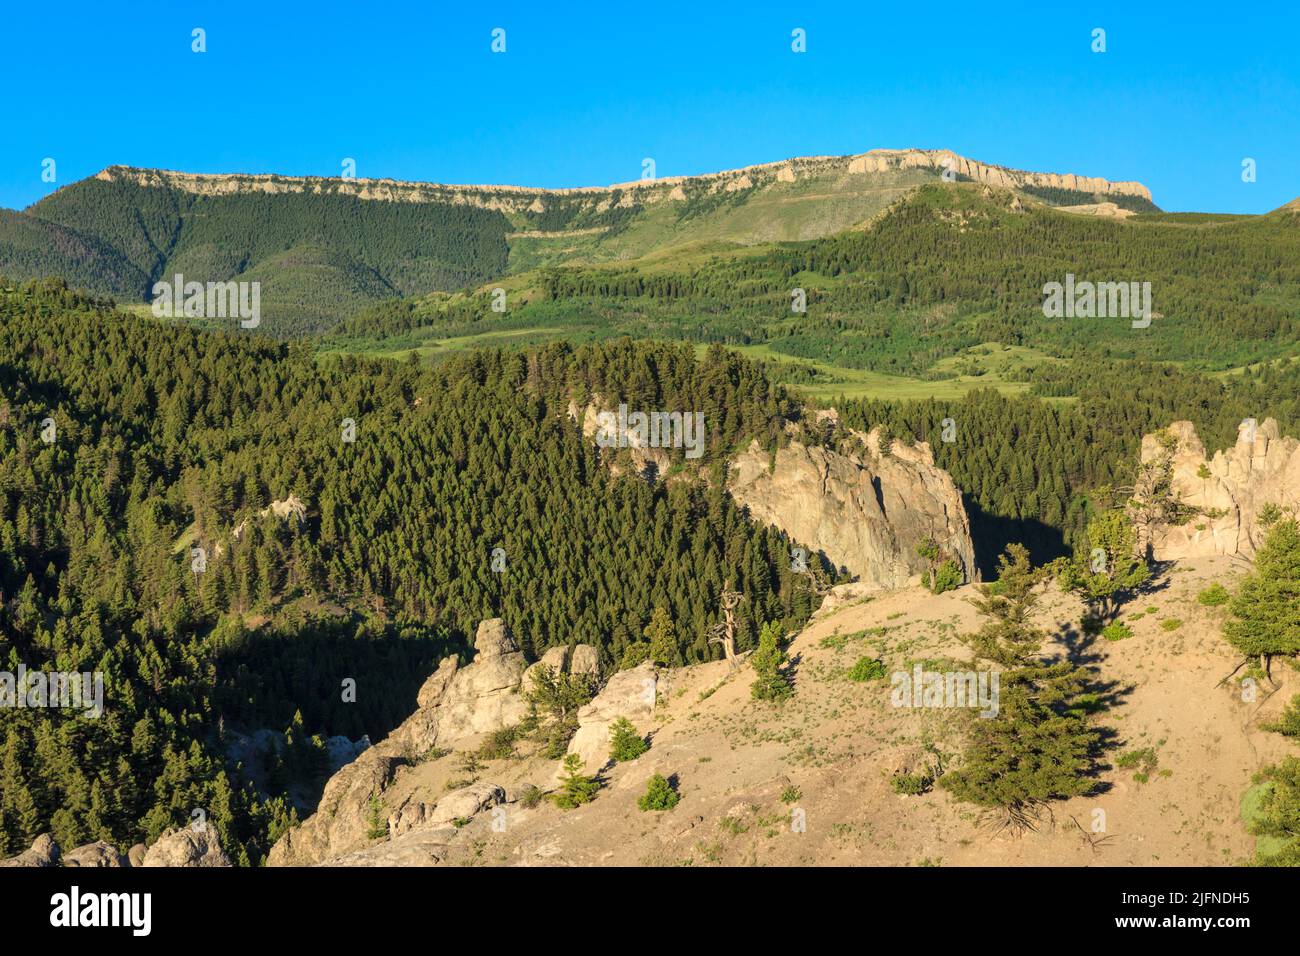 cliffs below table mountain in lewis and clark national forest near augusta, montana Stock Photo